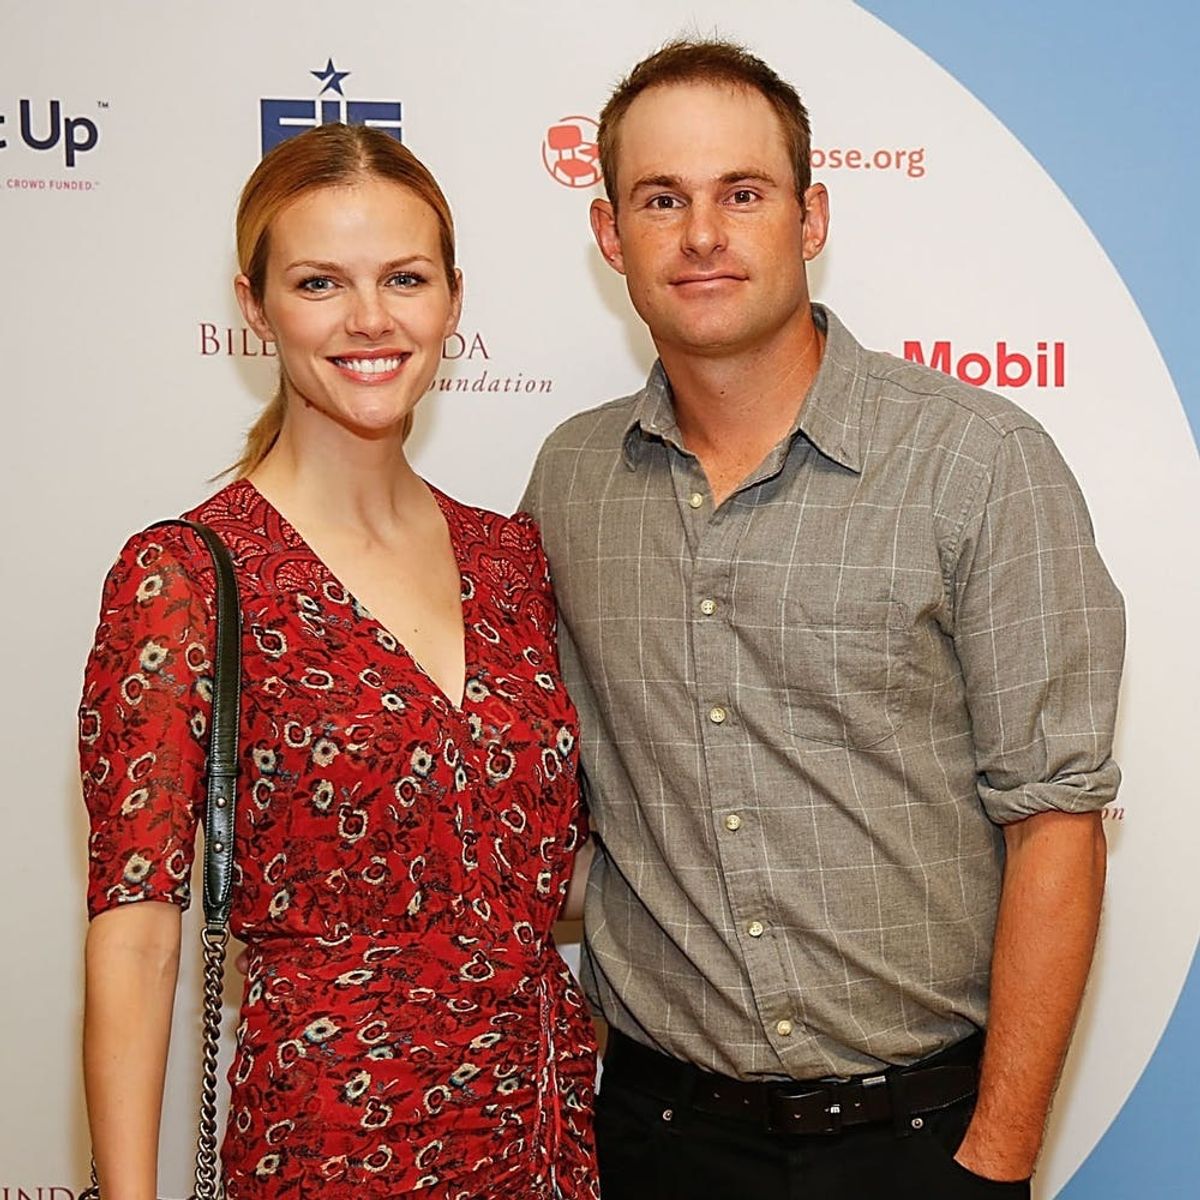 Here’s Why Andy Roddick Threw Away His Tennis Trophies